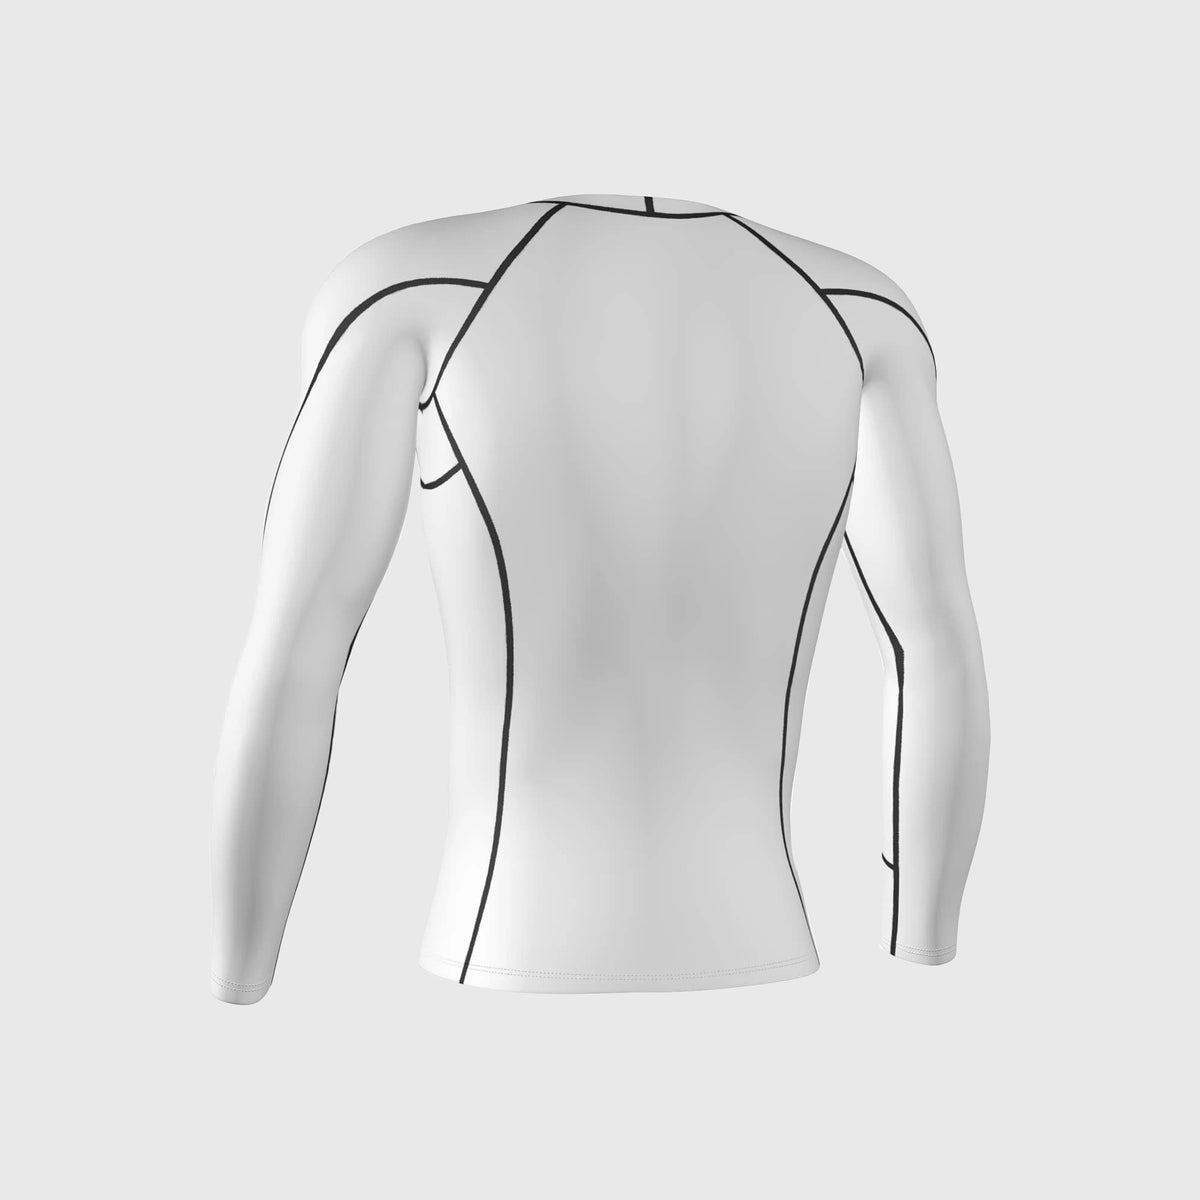 Mens Long Sleeve Compression Under Base Layer T-Shirt Sport Gym Fitness  Work ;